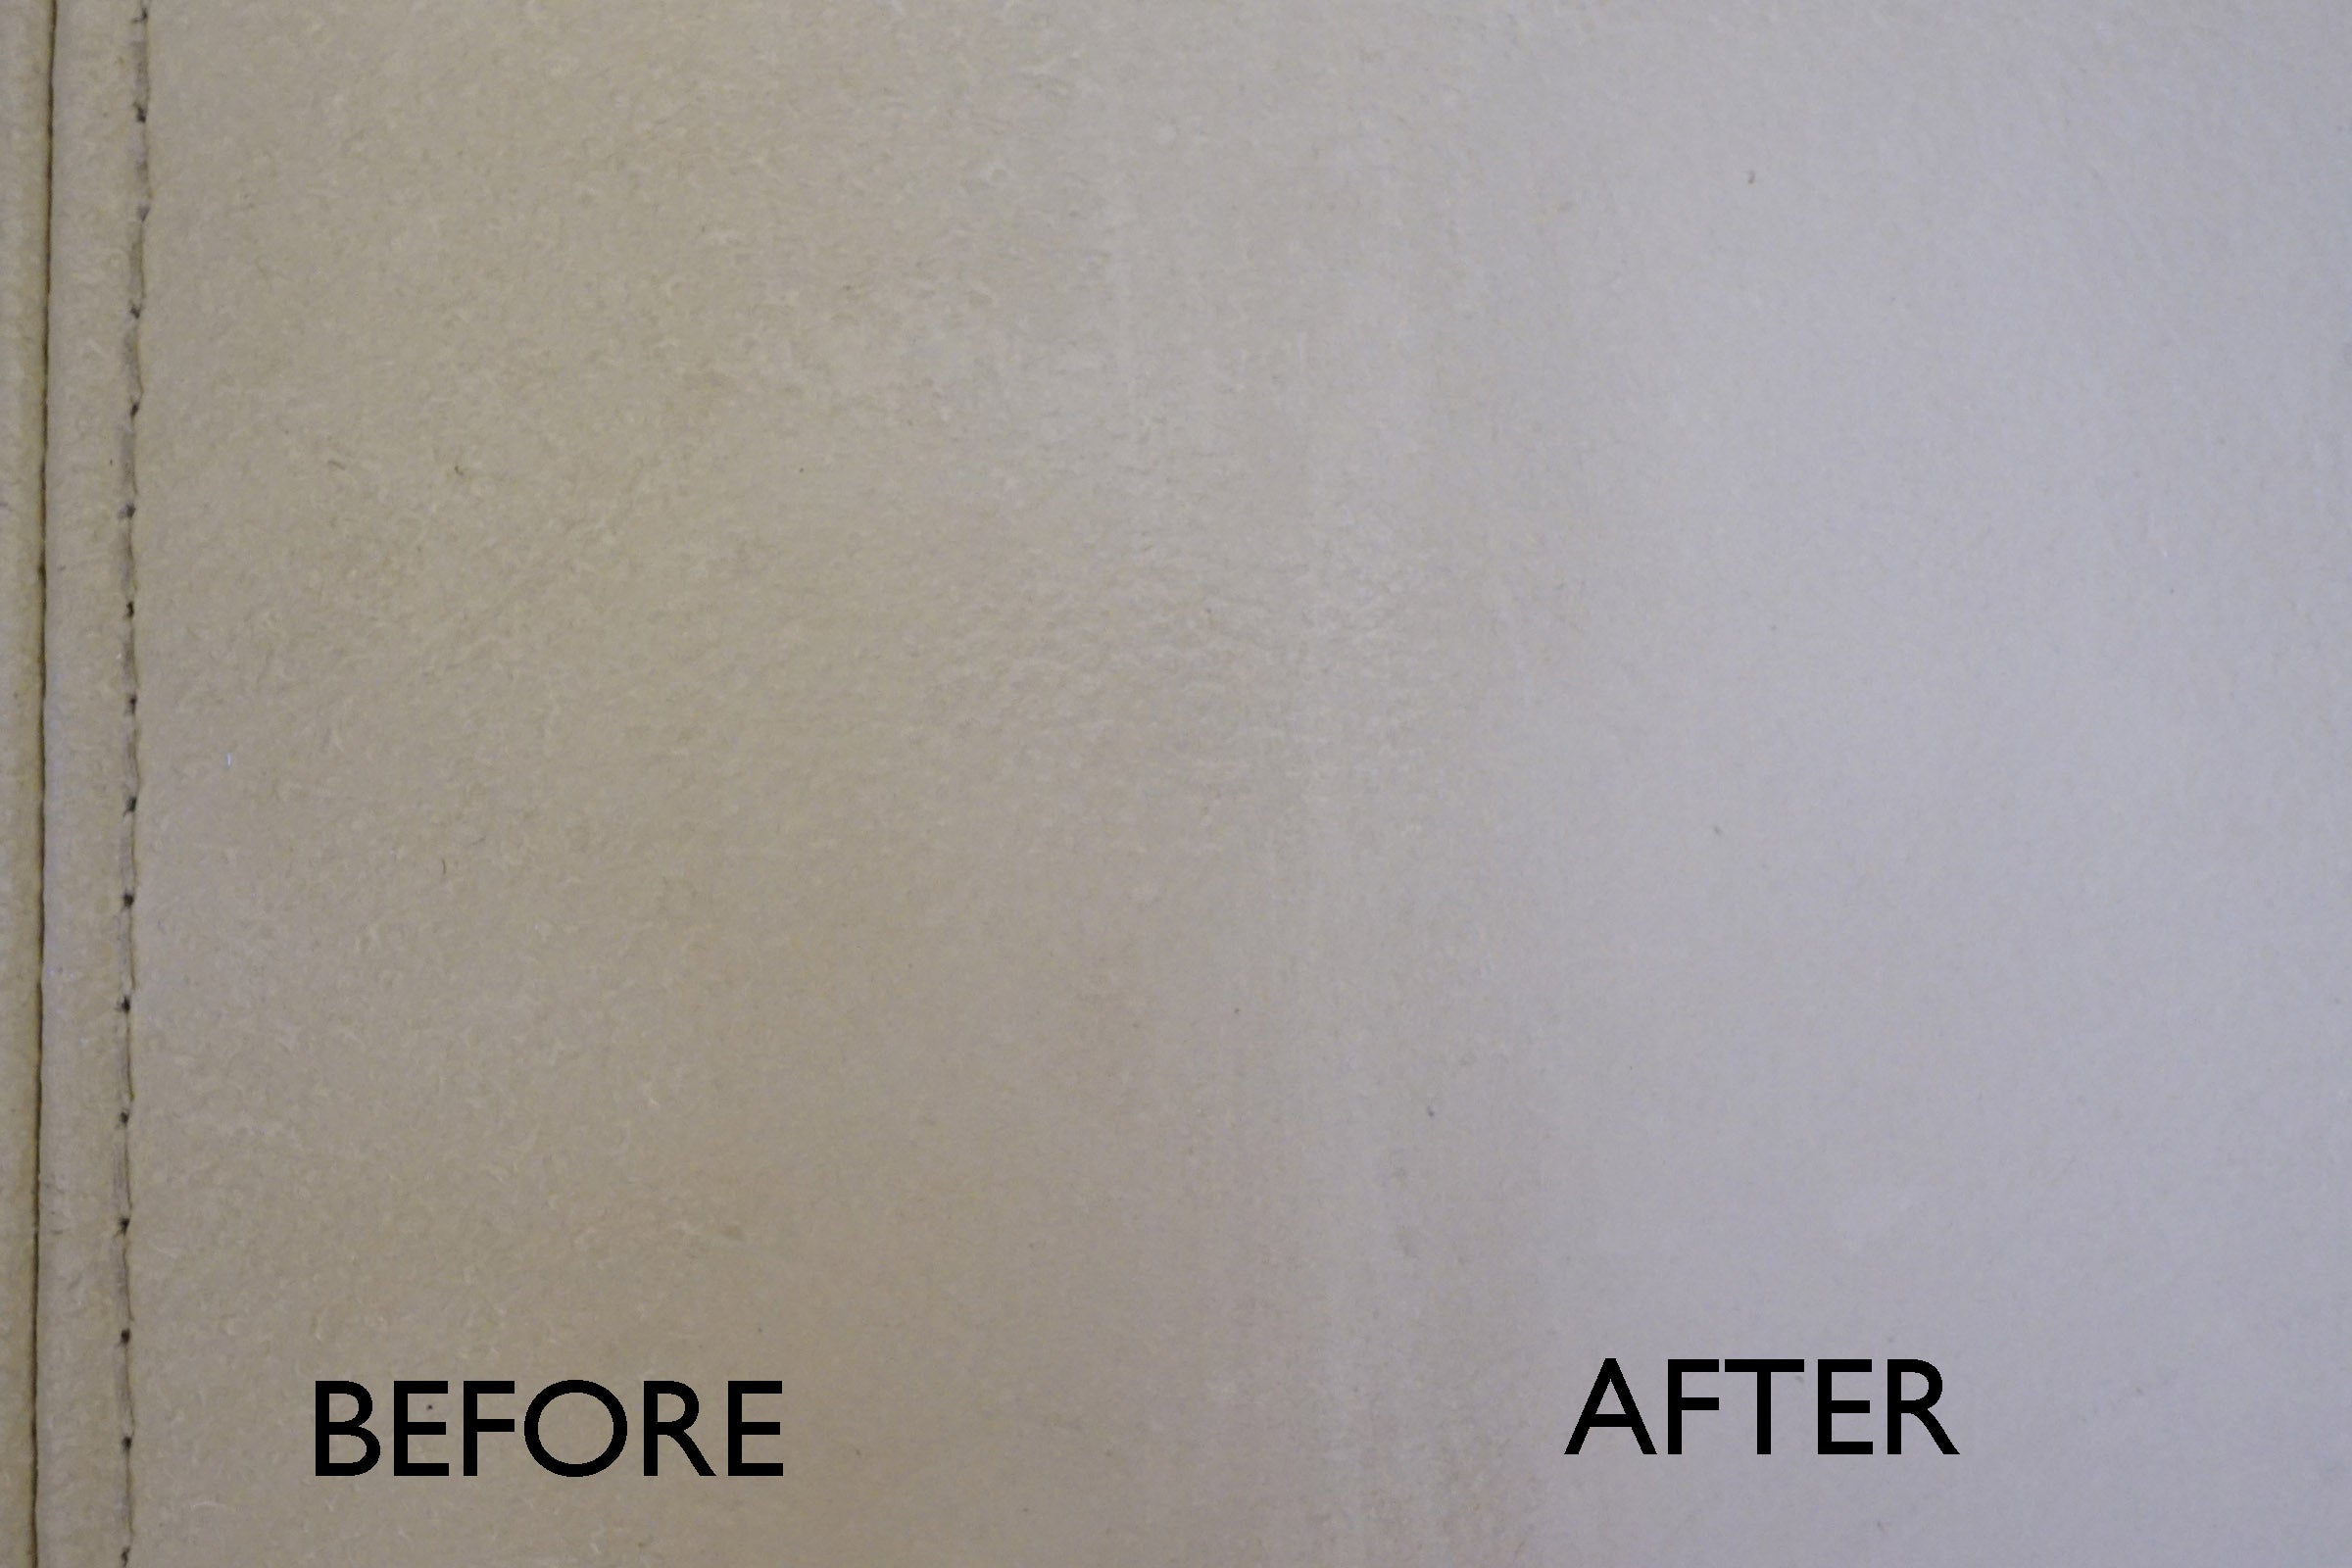 Carpet cleaning results before and after using Rug Doctor.